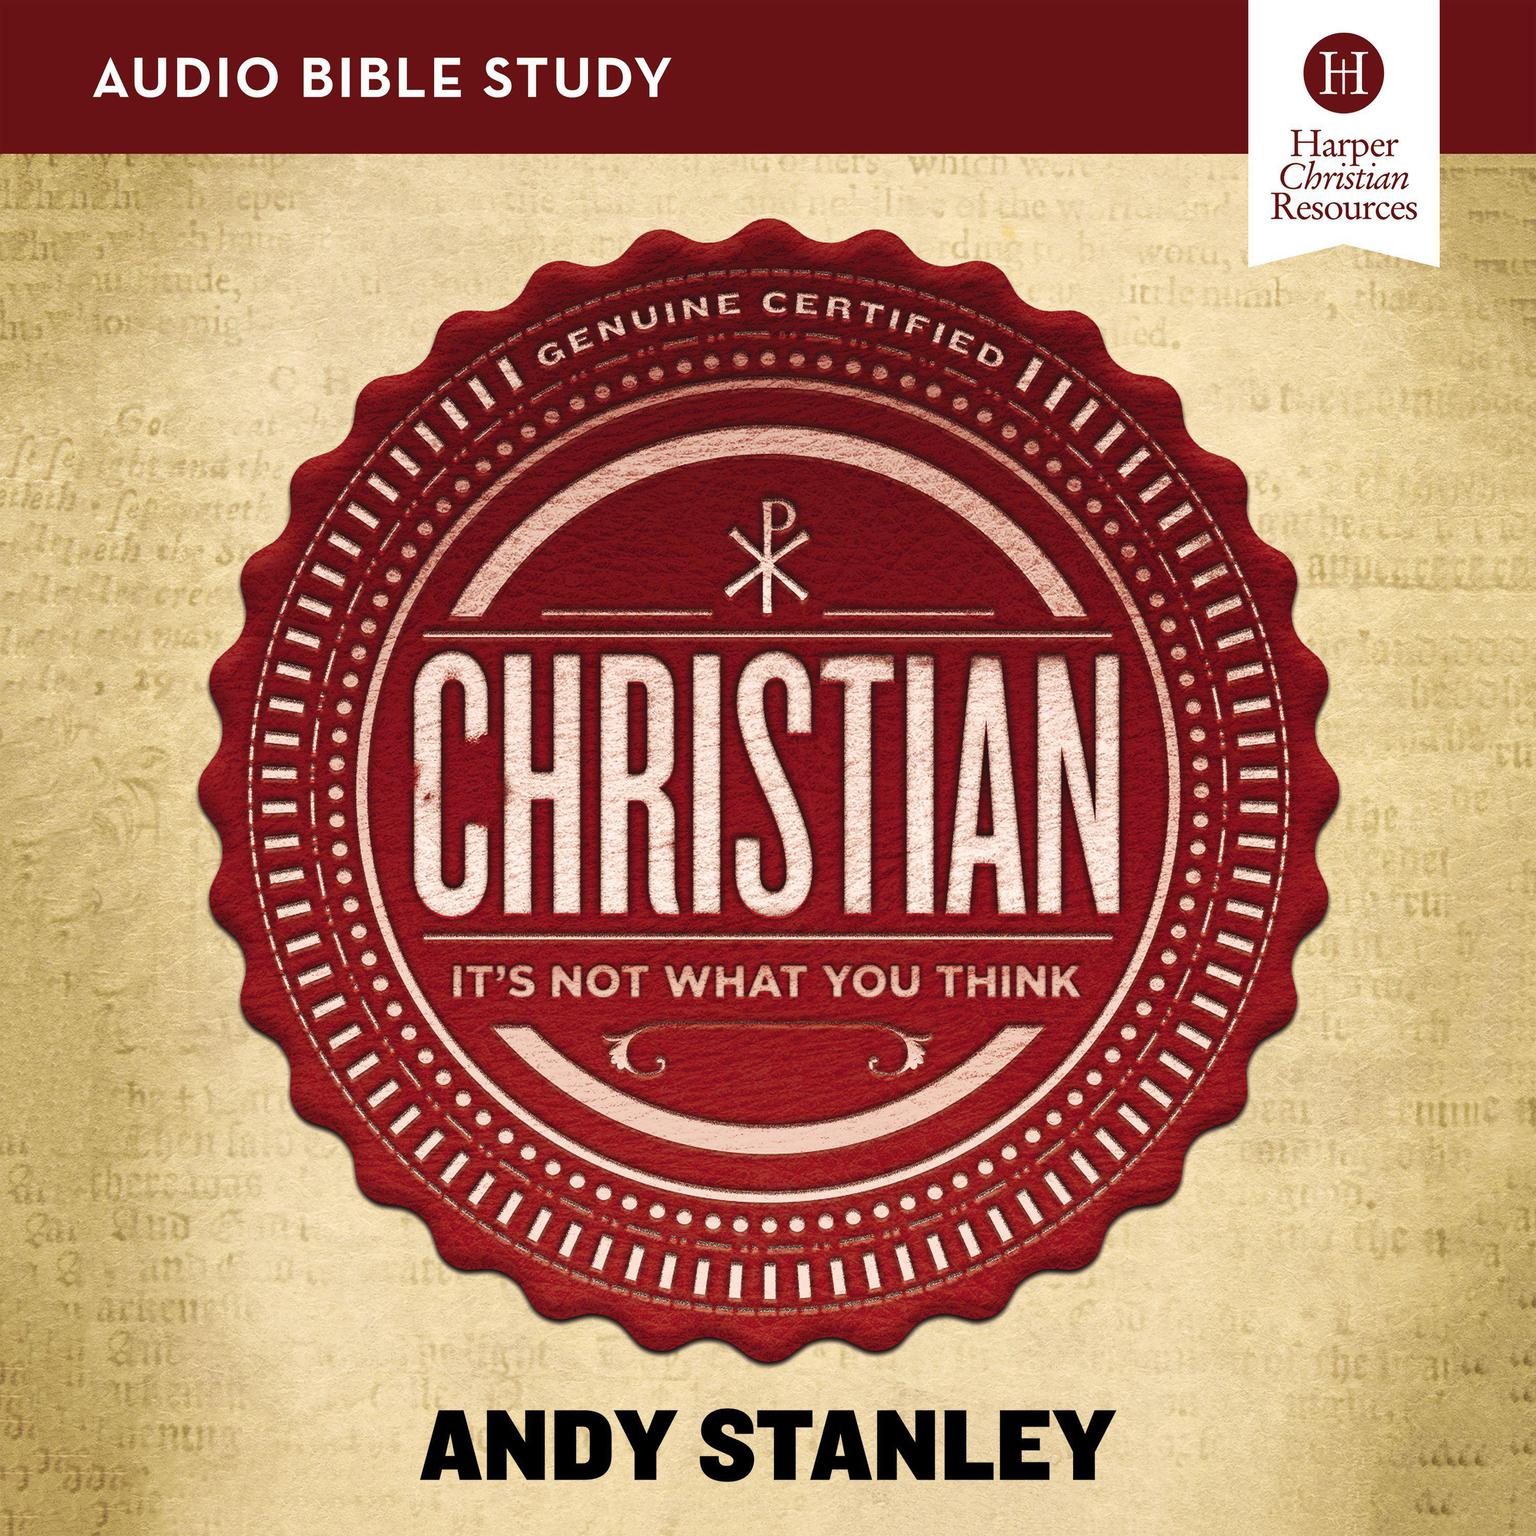 Christian: Audio Bible Studies: Its Not What You Think Audiobook, by Andy Stanley